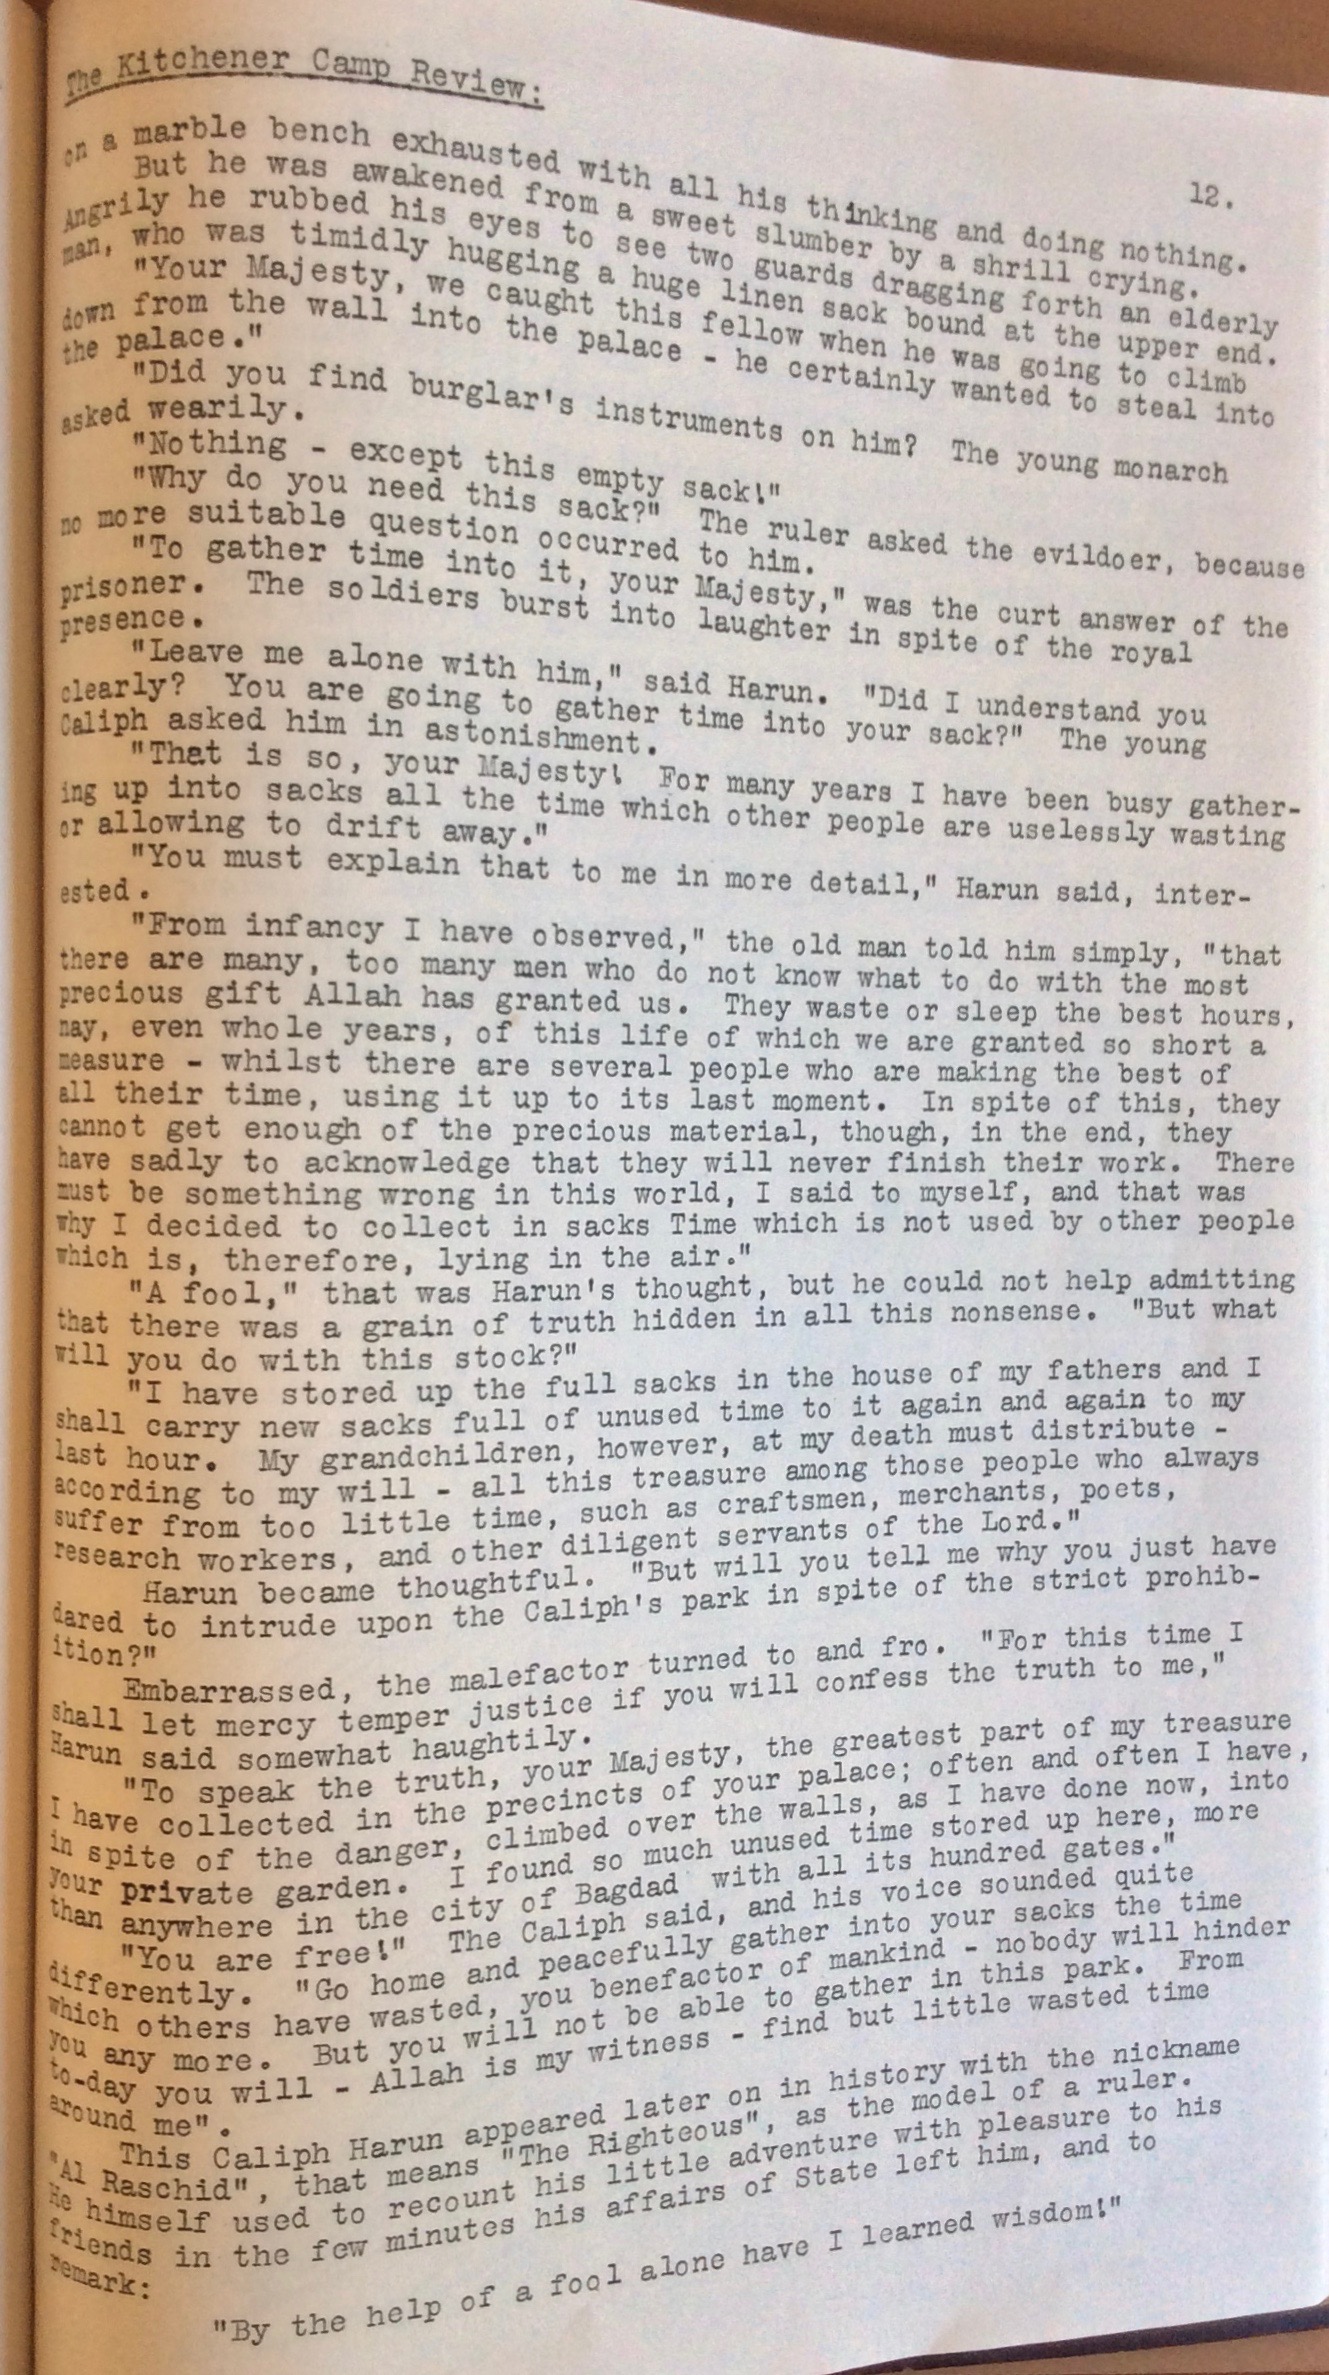 The Kitchener Camp Review, August 1939, page 12